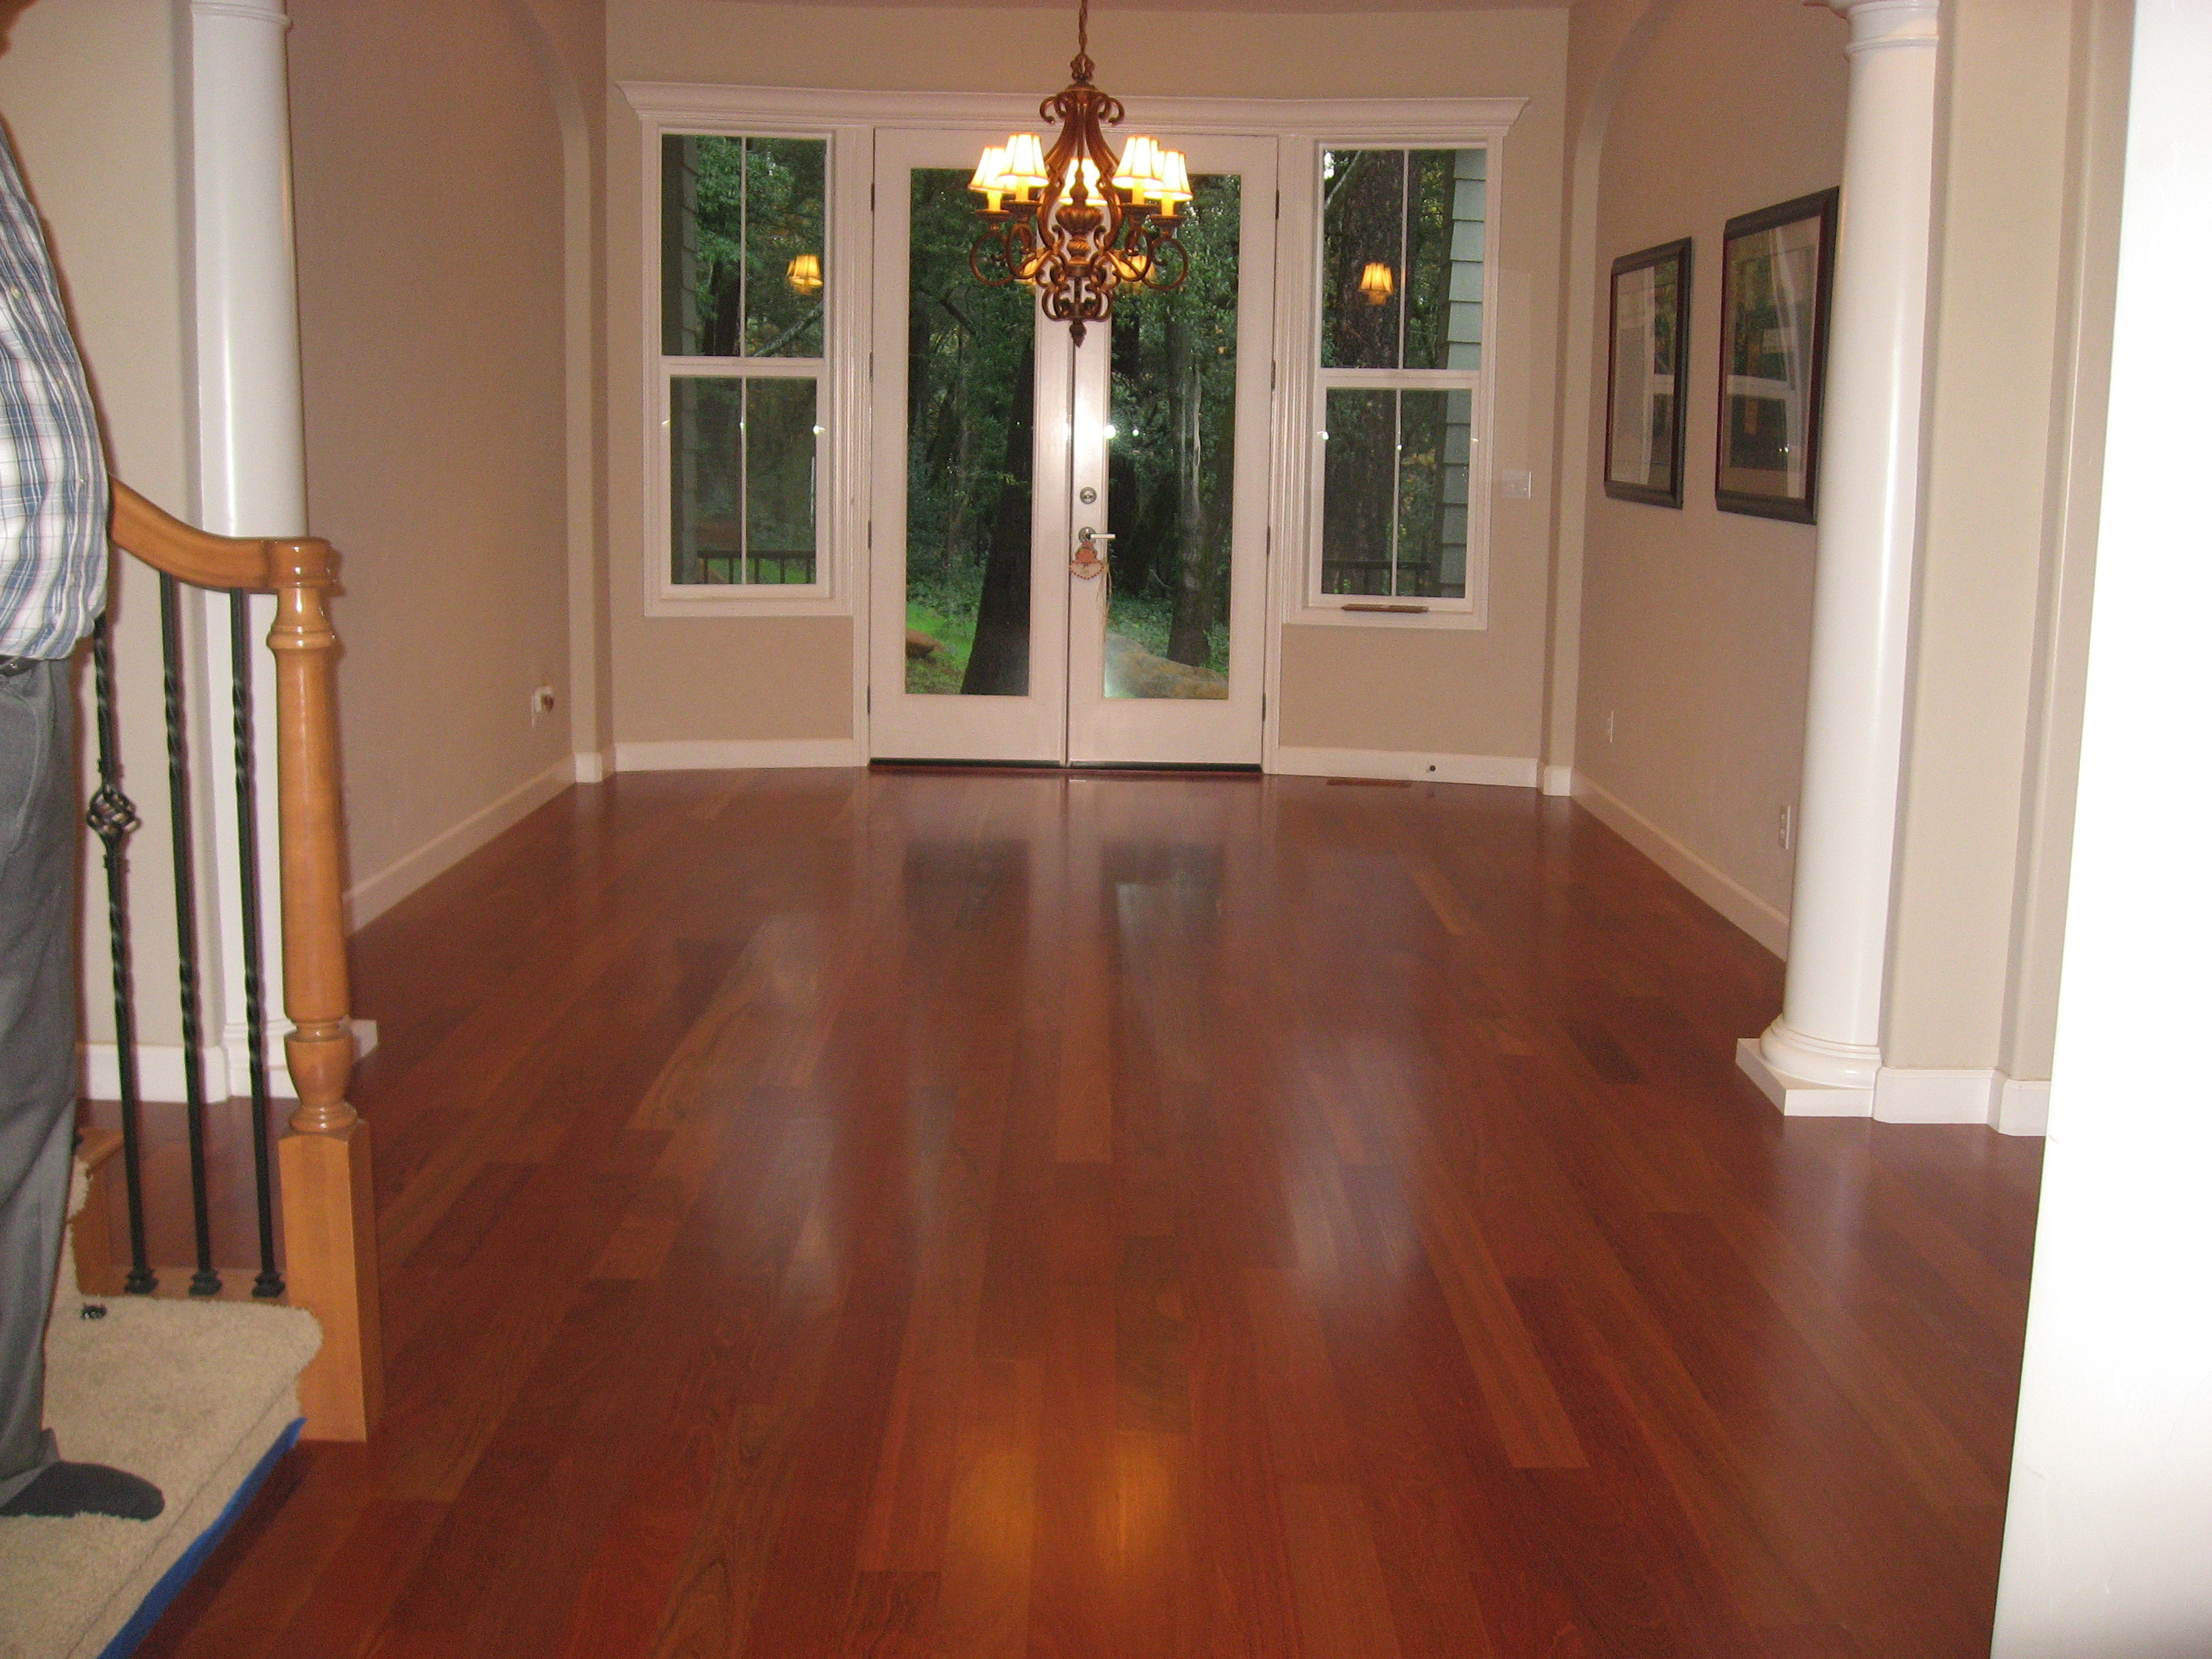 painted hardwood floors pictures of beautiful paint colors that go with wood trim houuzzz of color intended for paint colors that go with wood trim unique best paint colors for cherryd floors most can